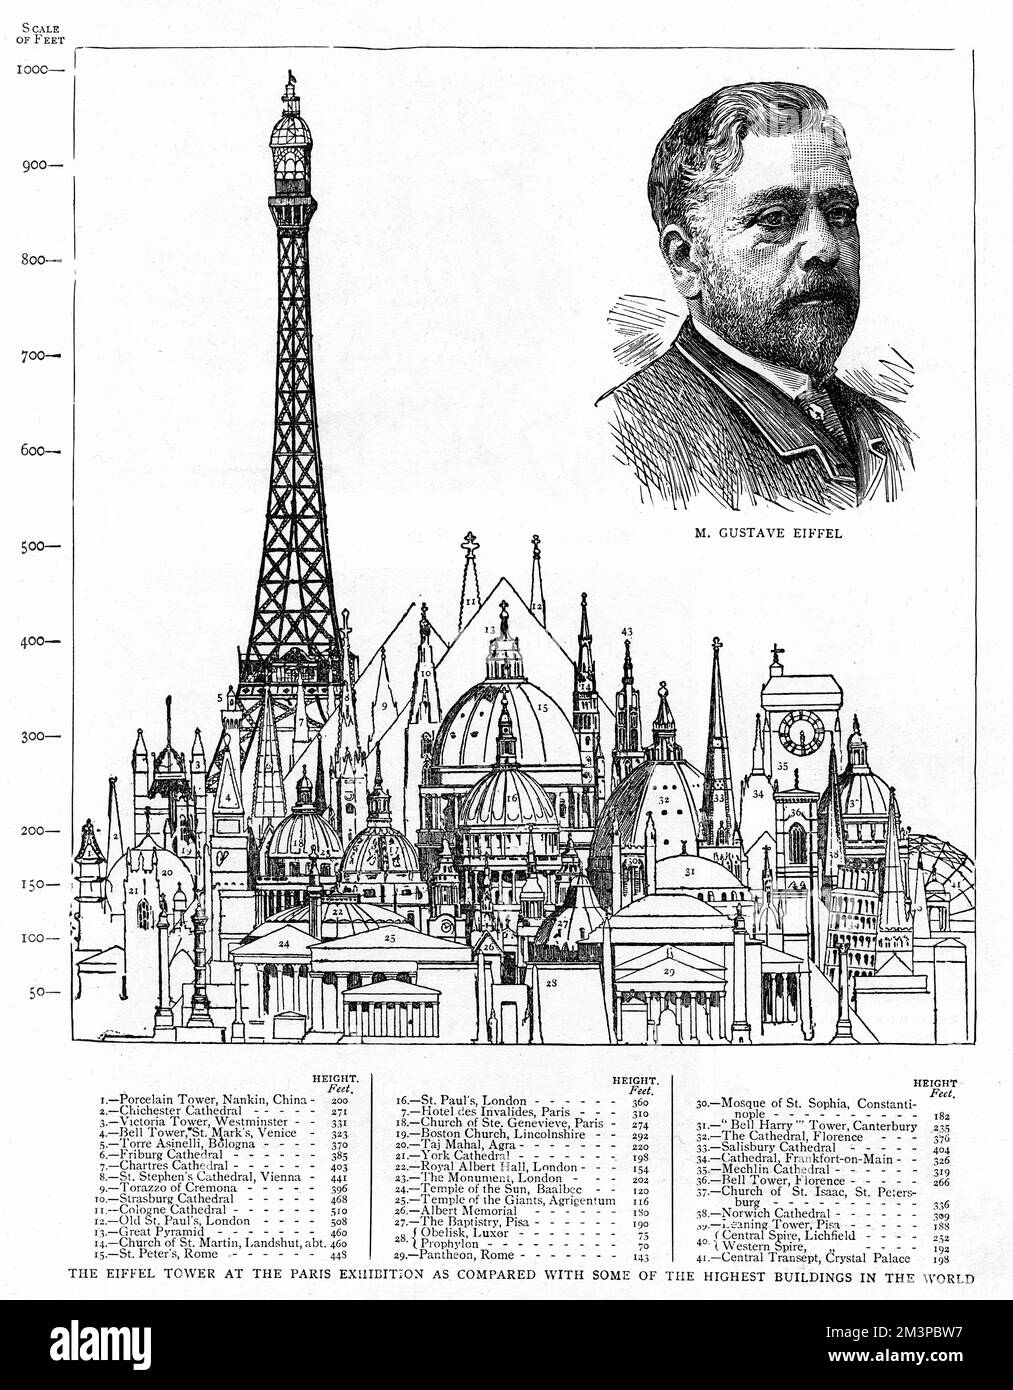 A diagram showing how much higher the Eiffel Tower was in comparison to other world-famous tall buildings when it was constructed in 1889.  Even the spires of Cologne and Old St. Paul's cathedral are dwarfed by its immense height which was almost 1000 feet.  Inset is a portrait of its creator, French engineer, Gustave Eiffel.  The Eiffel Tower was built as a centrepiece to the Paris International Exhibition.  Despite many detractors initially, the building was a huge success and is today an iconic symbol of Paris and France.       Date: 1889 Stock Photo